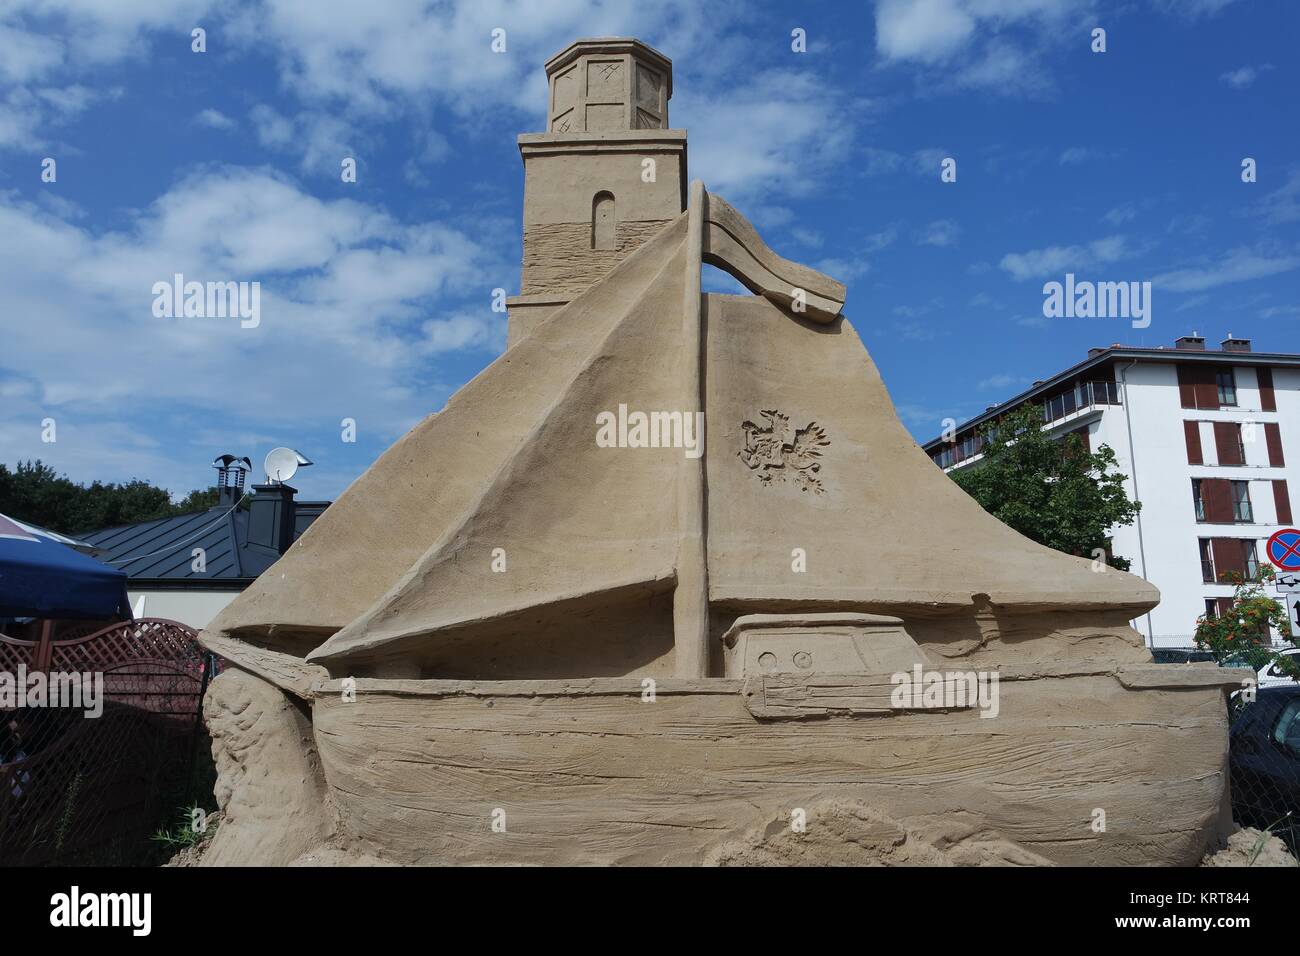 sand sculptures in the city Stock Photo